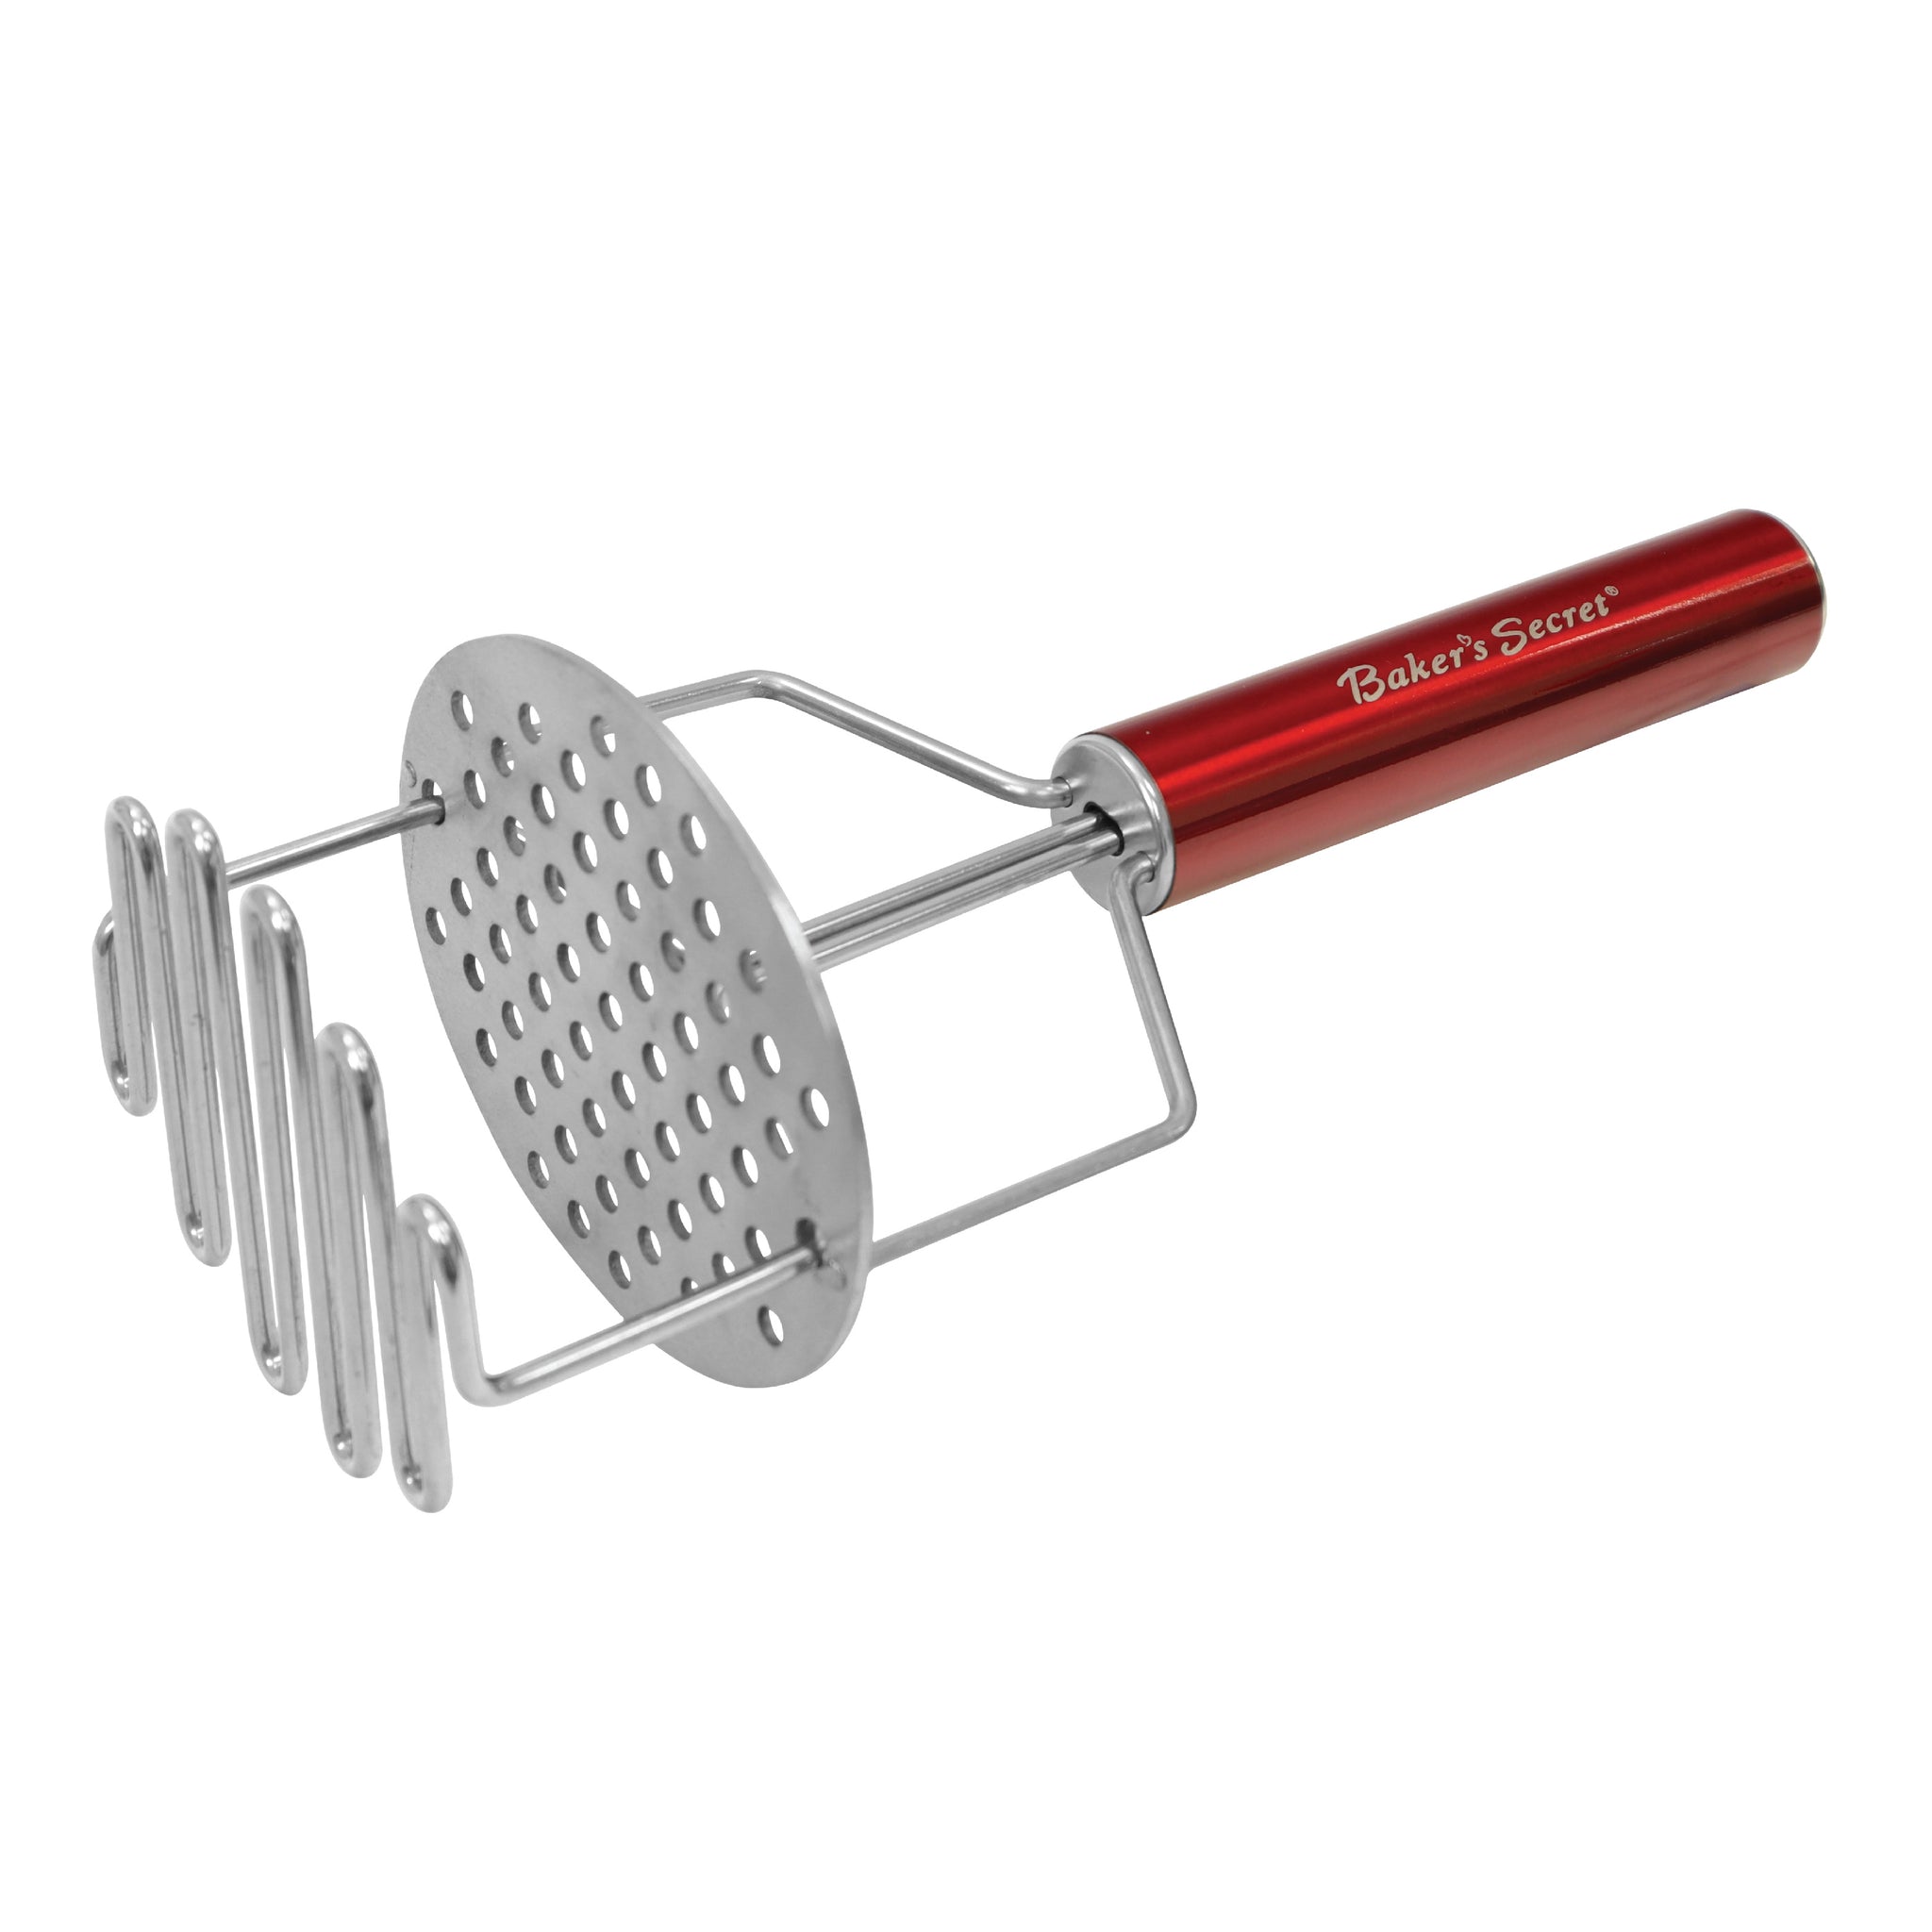 Stainless Steel Dual Press Potato Masher Red Cookware Accessories - Baker's Secret